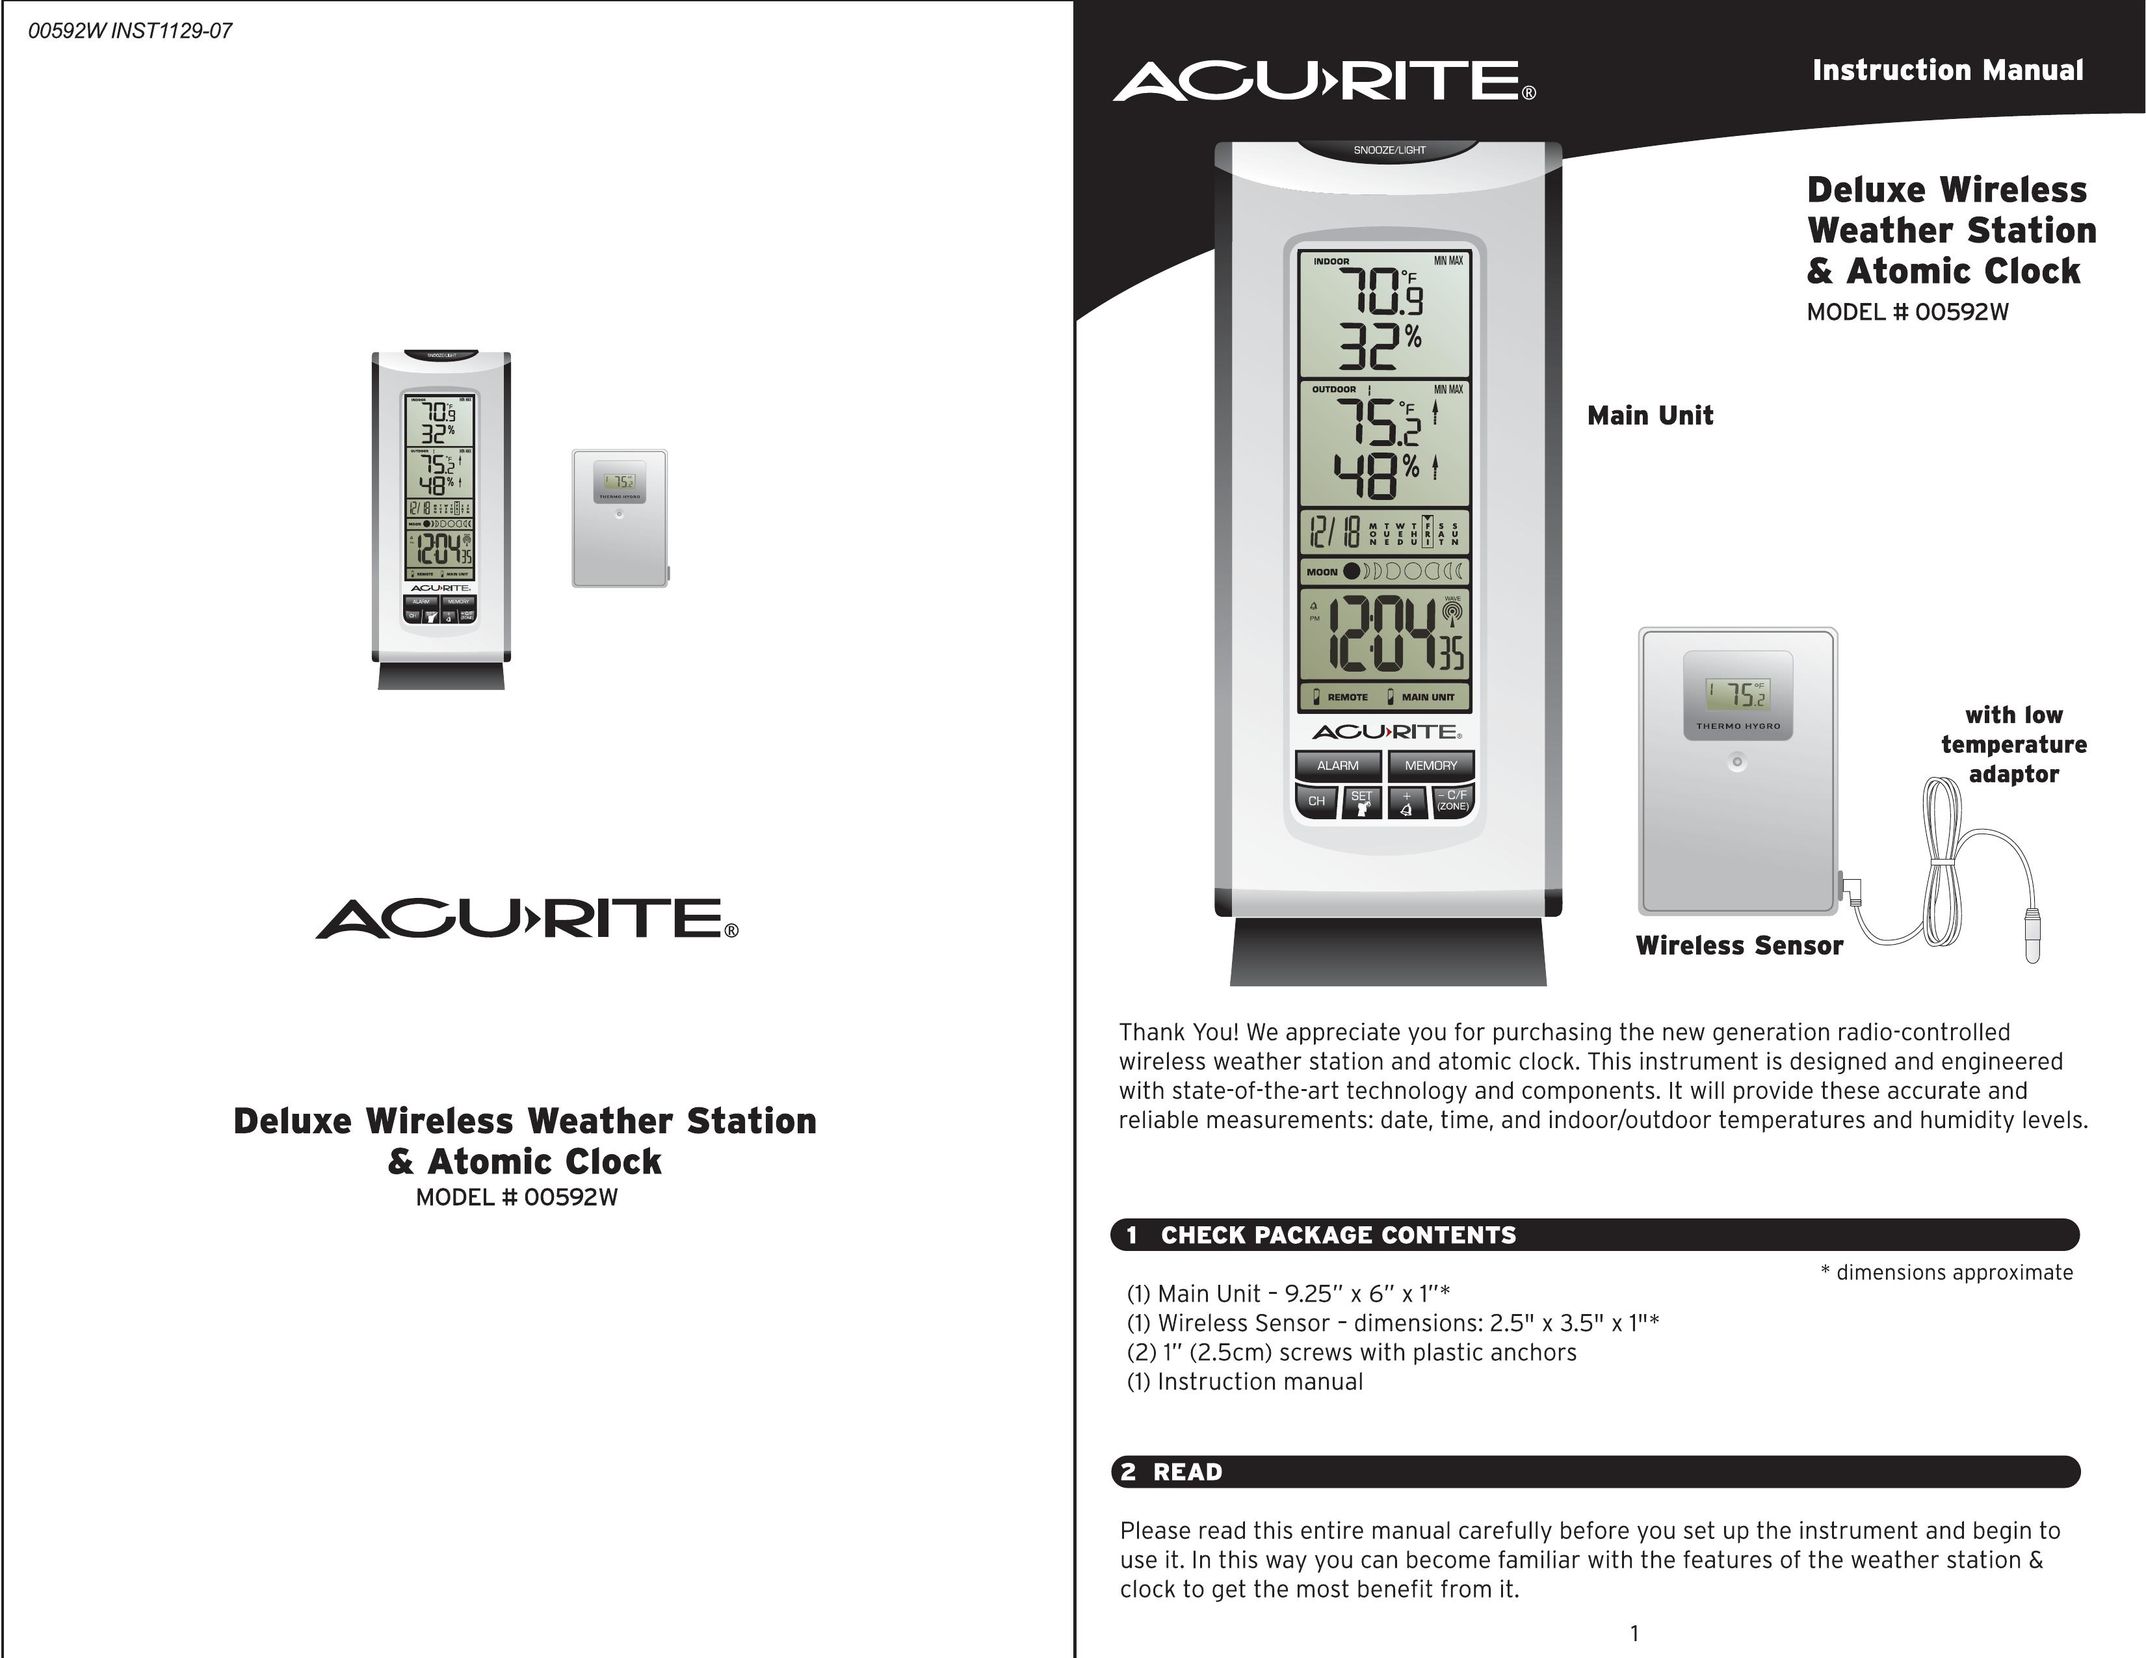 Acu-Rite DeIux wirelss weather station and atomic clock Clock User Manual